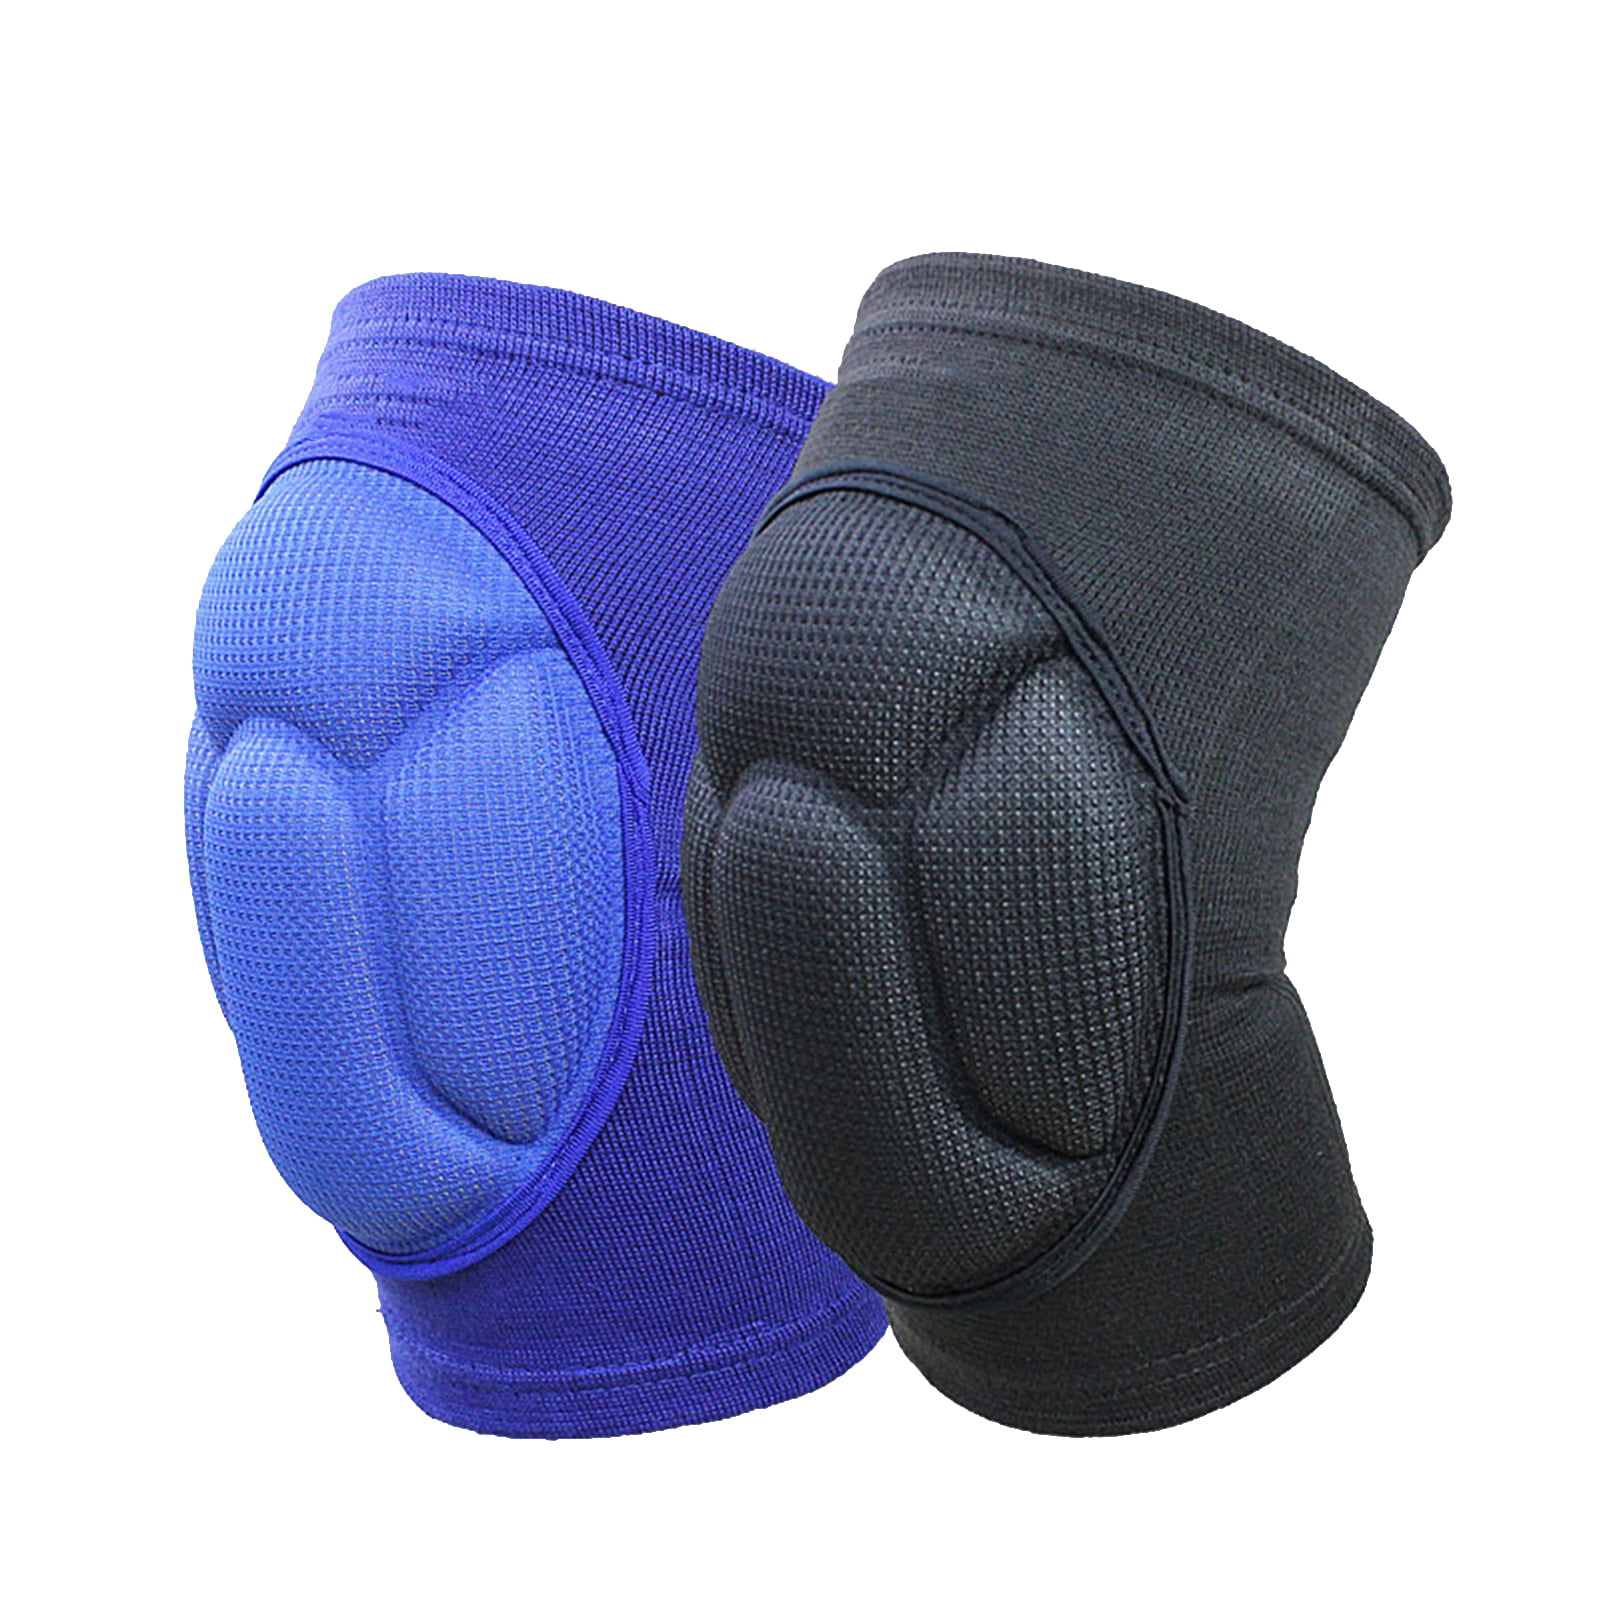 2PCS Exercise Knee Pads For Gym Bike Volleyball Football Sports Protector Pads